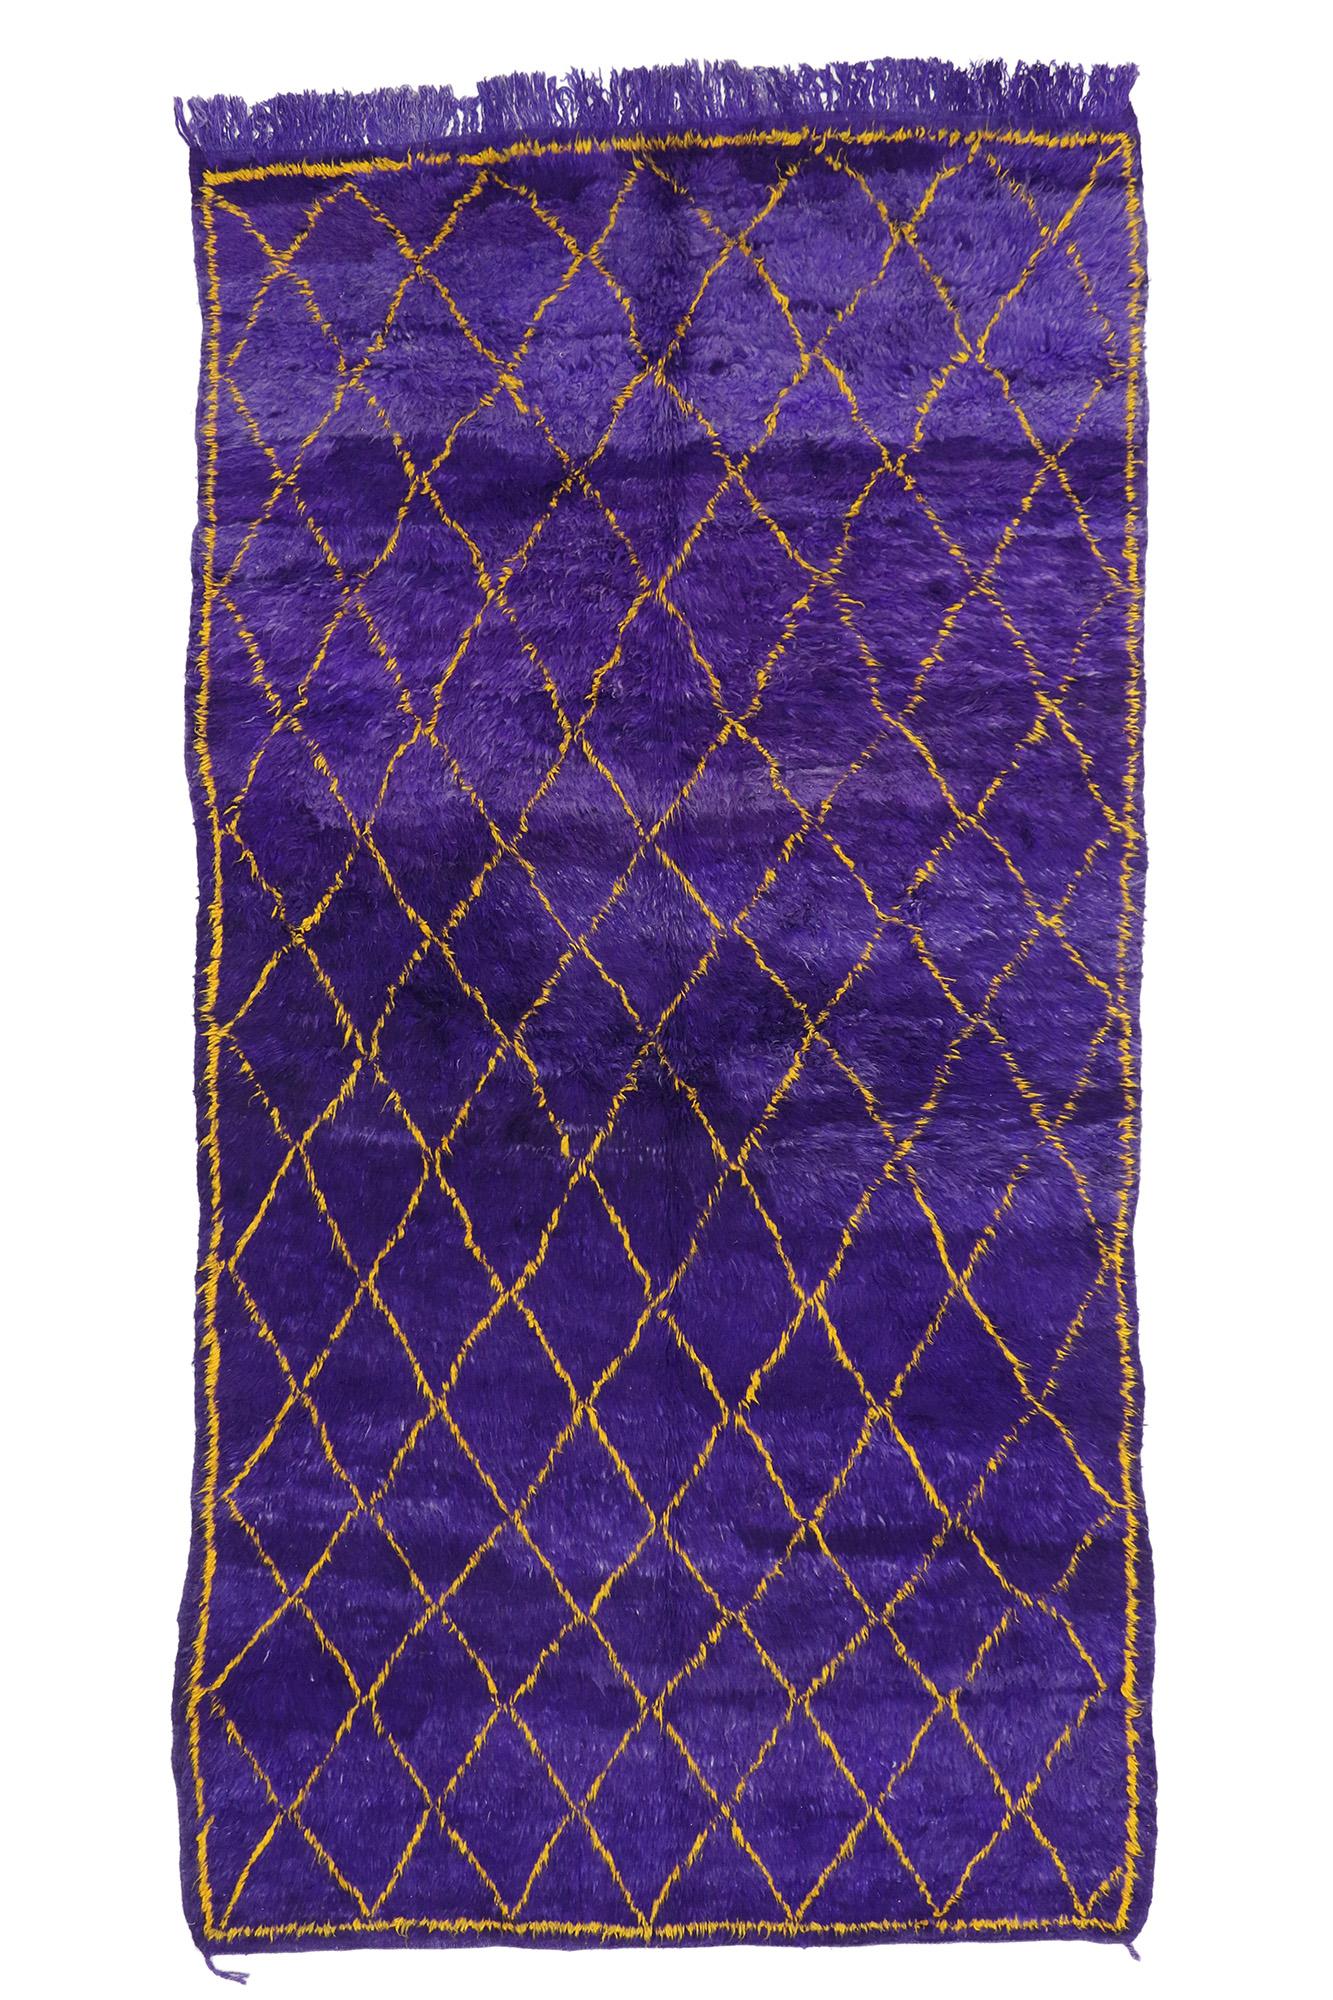 Vintage Purple Moroccan Beni Ourain Rug, Midcentury Modern Meets Boho Chic For Sale 2